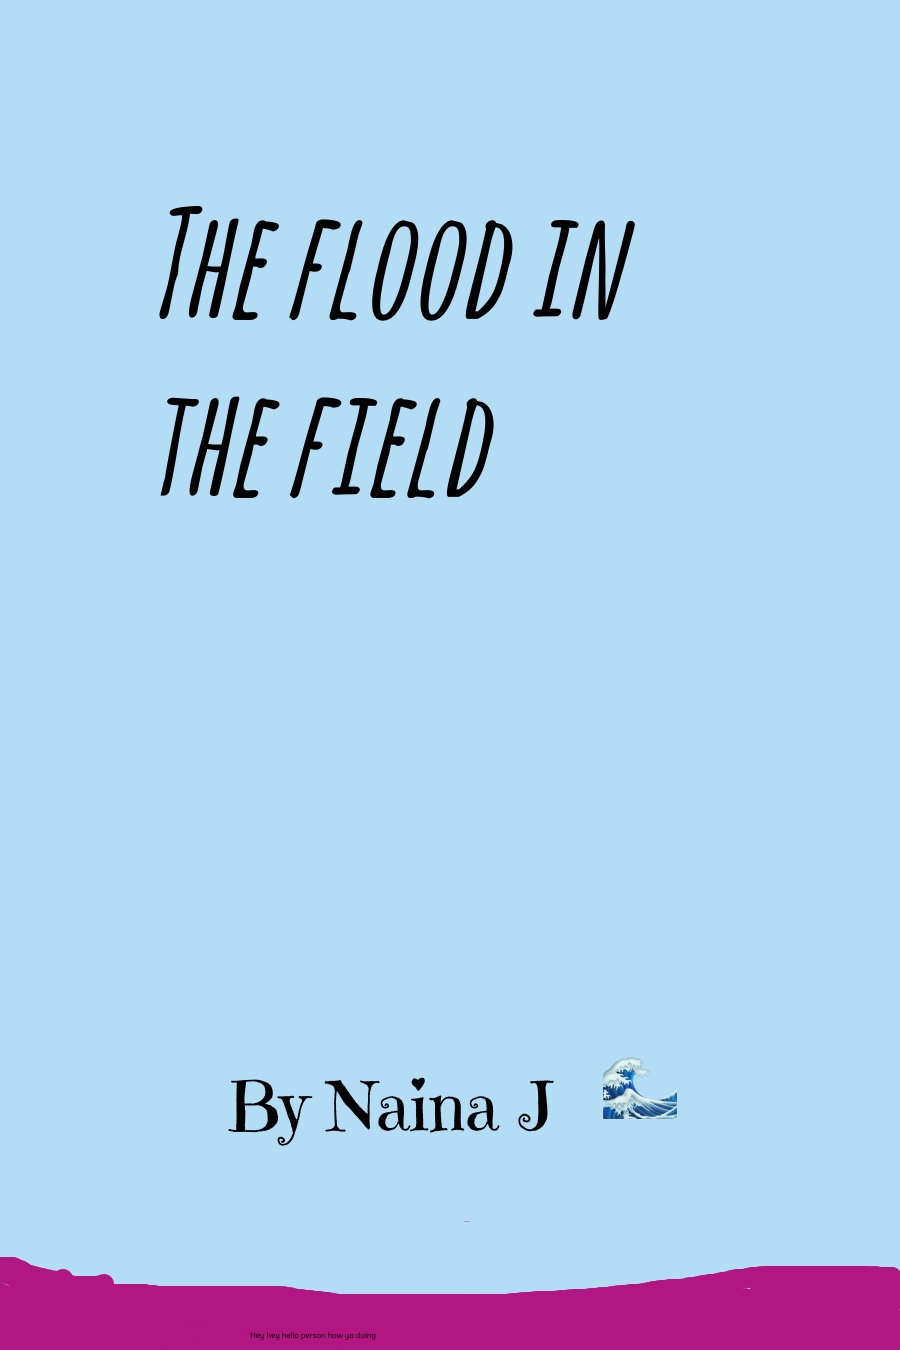 The Flood in the Field by Naina J